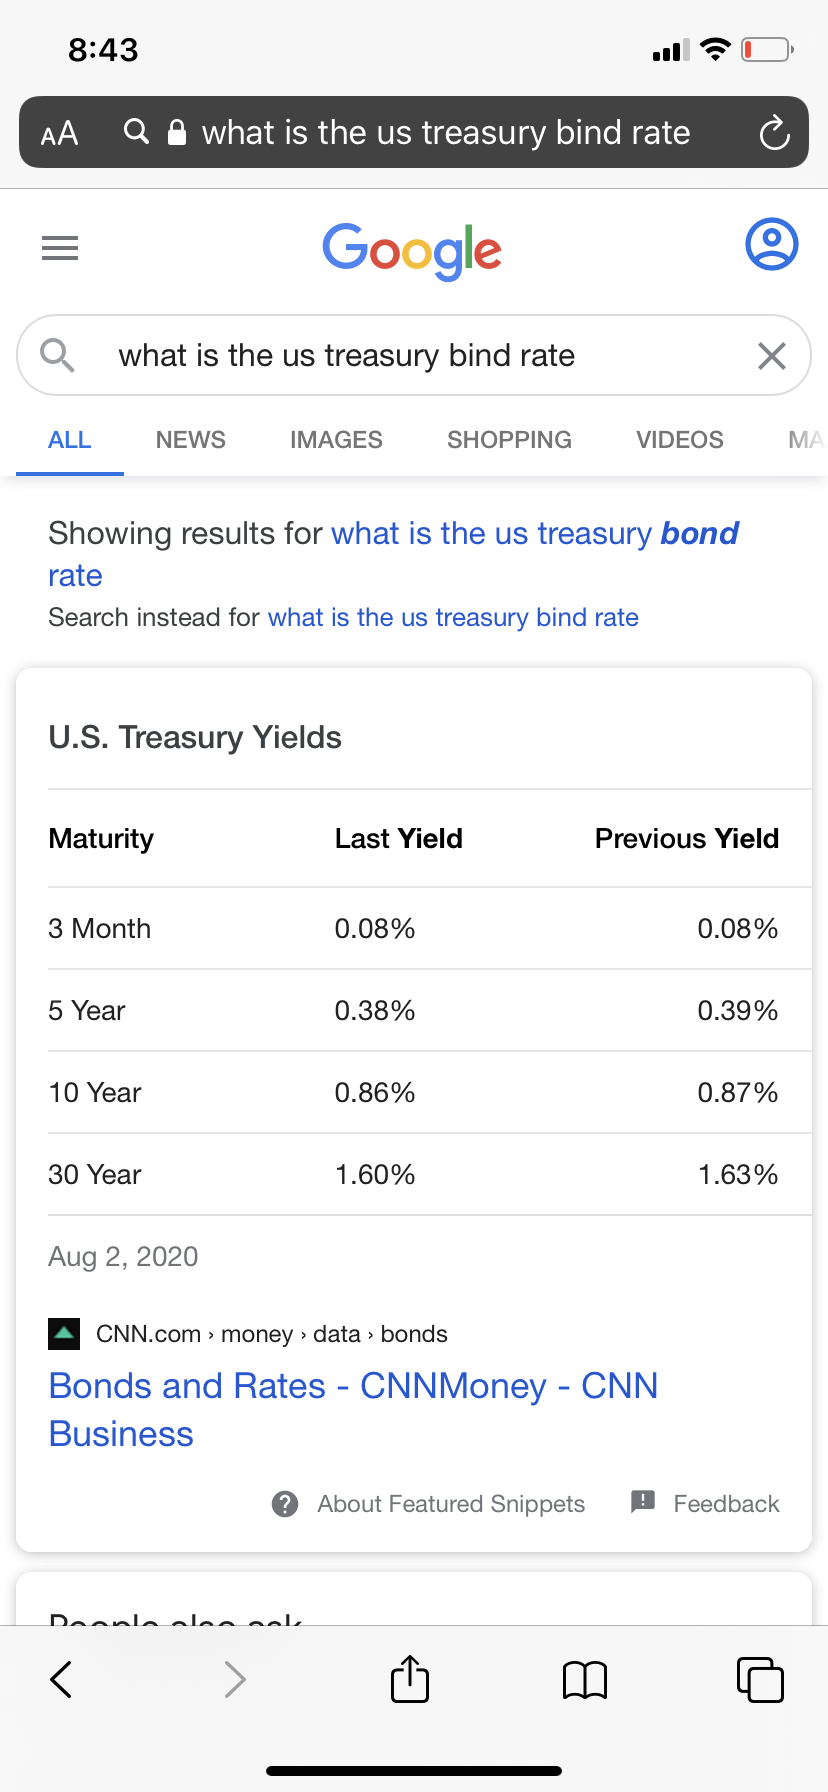 8:43
AA
what is the us treasury bind rate
Google
what is the us treasury bind rate
ALL
NEWS
IMAGES
SHOPPING
VIDEOS
МА
Showing results for what is the us treasury bond
rate
Search instead for what is the us treasury bind rate
U.S. Treasury Yields
Maturity
Last Yield
Previous Yield
З Month
0.08%
0.08%
5 Year
0.38%
0.39%
10 Year
0.86%
0.87%
30 Year
1.60%
1.63%
Aug 2, 2020
CNN.com > money > data bonds
Bonds and Rates - CNNMoney - CNN
Business
About Featured Snippets
Feedback
Deanlaolea sk
